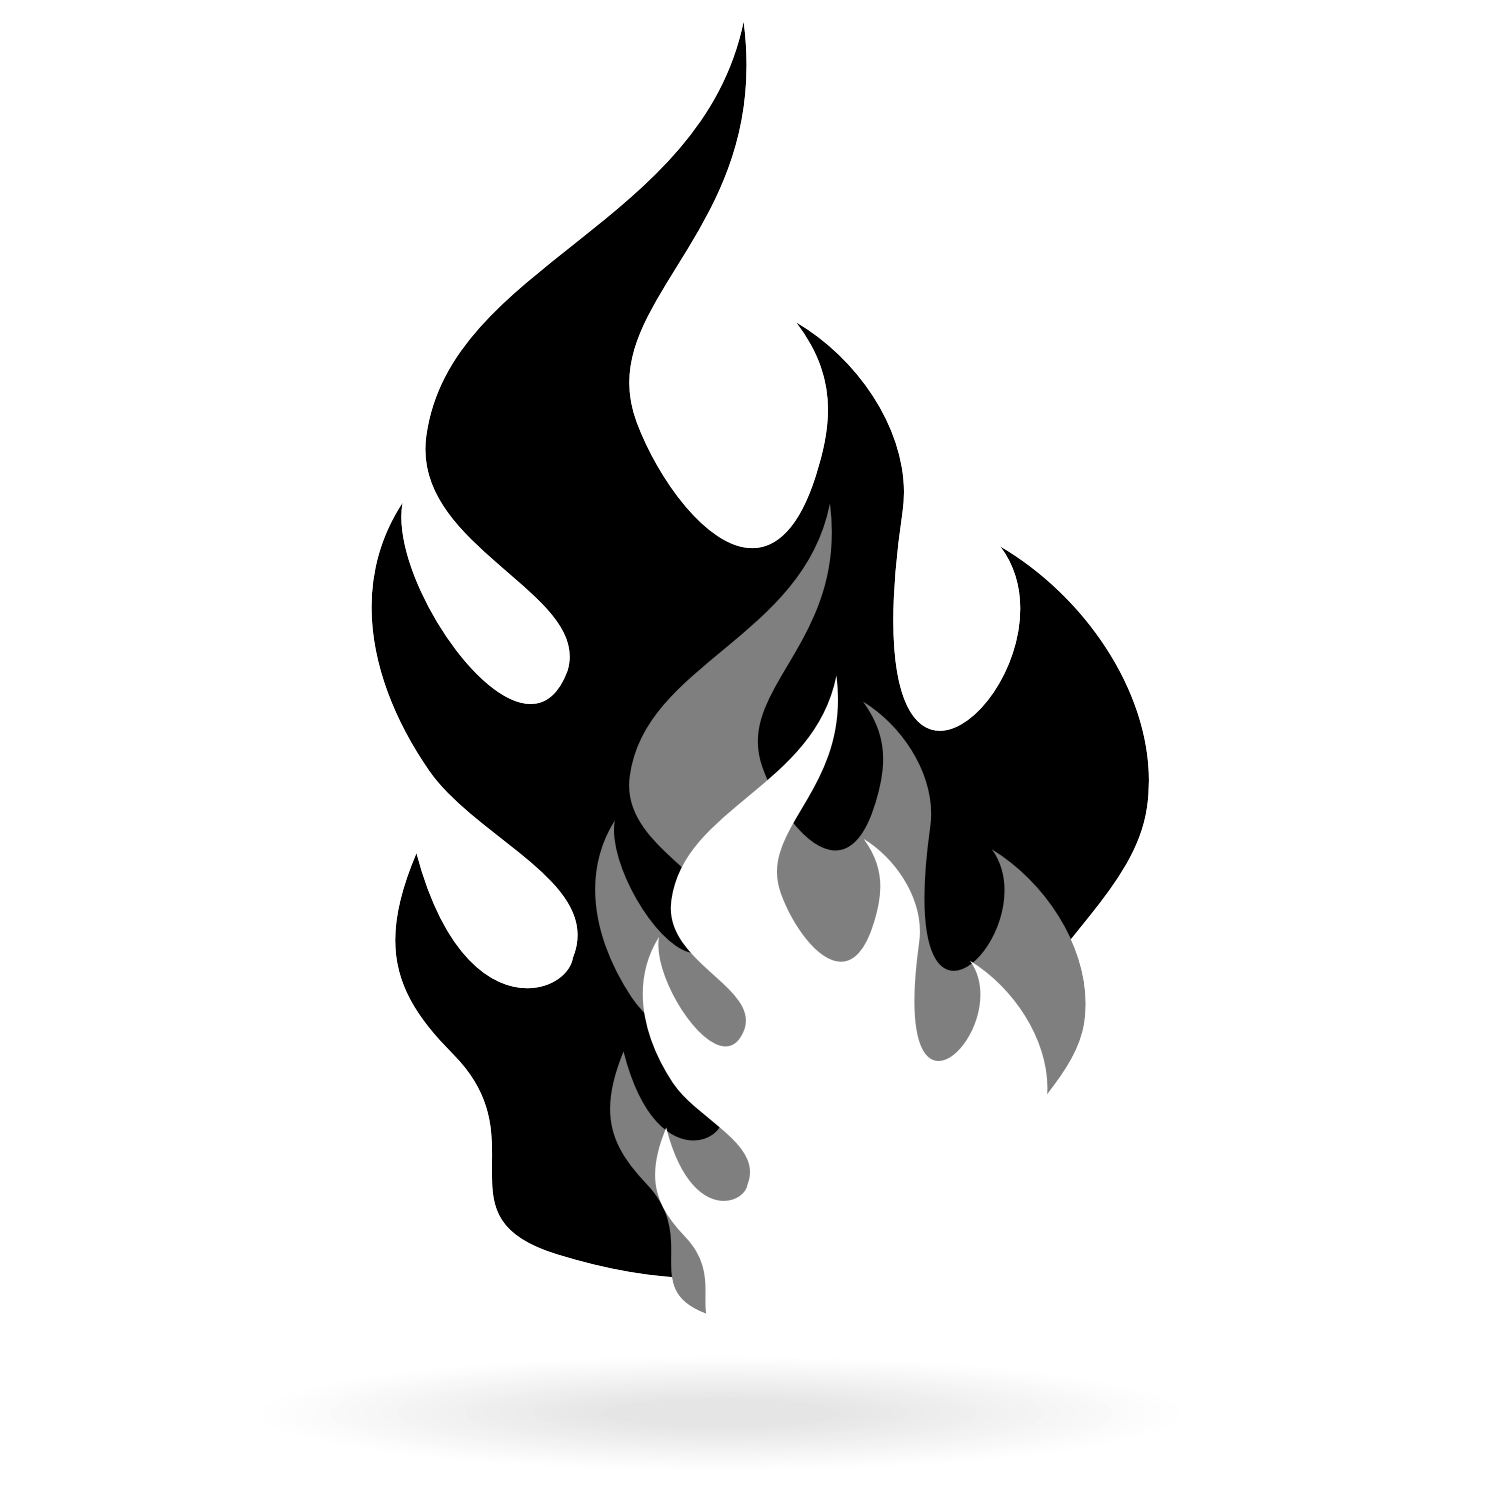 Black Flame Logo - Vector for free use: Black flame vector